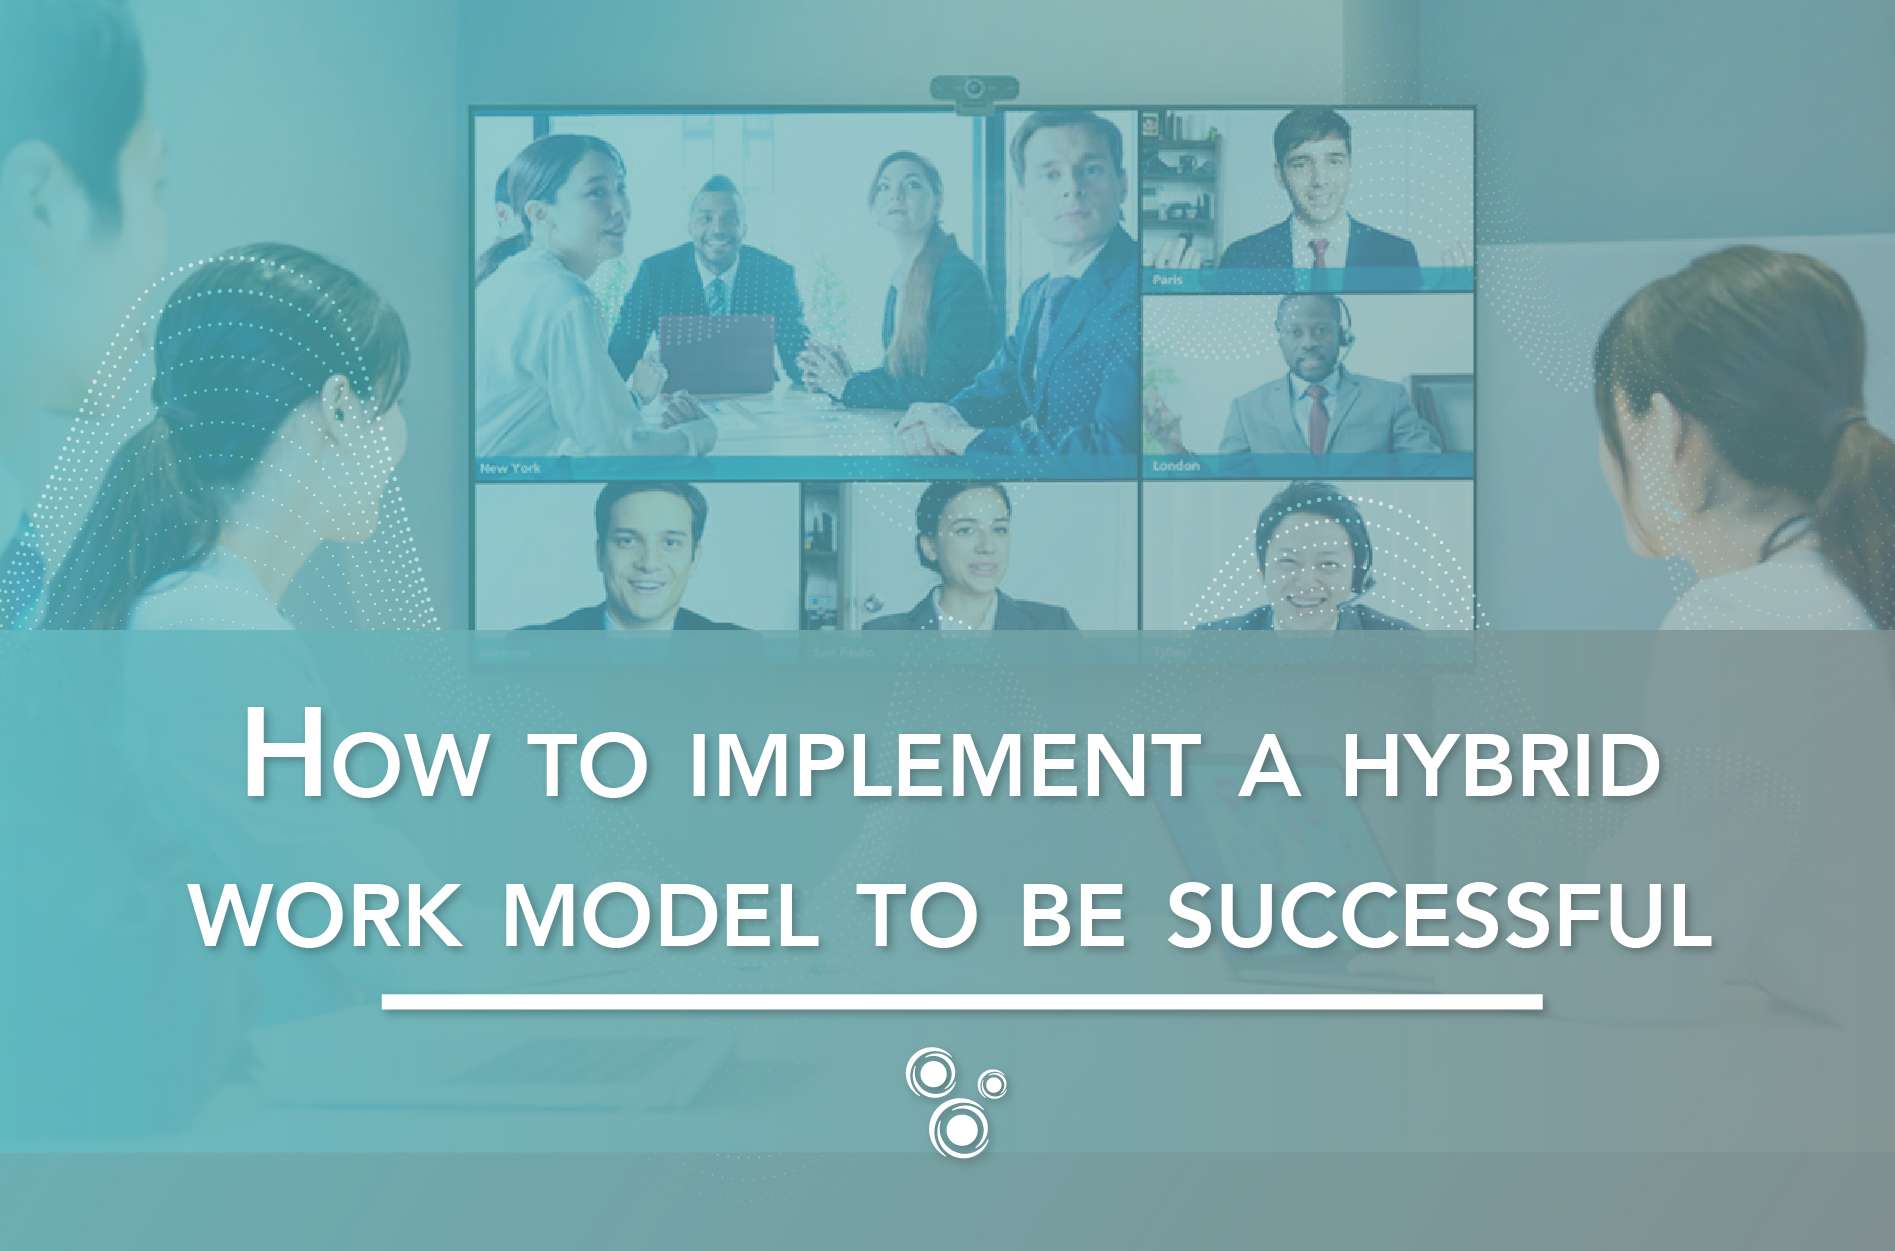 How to implement a hybrid work model to be successful